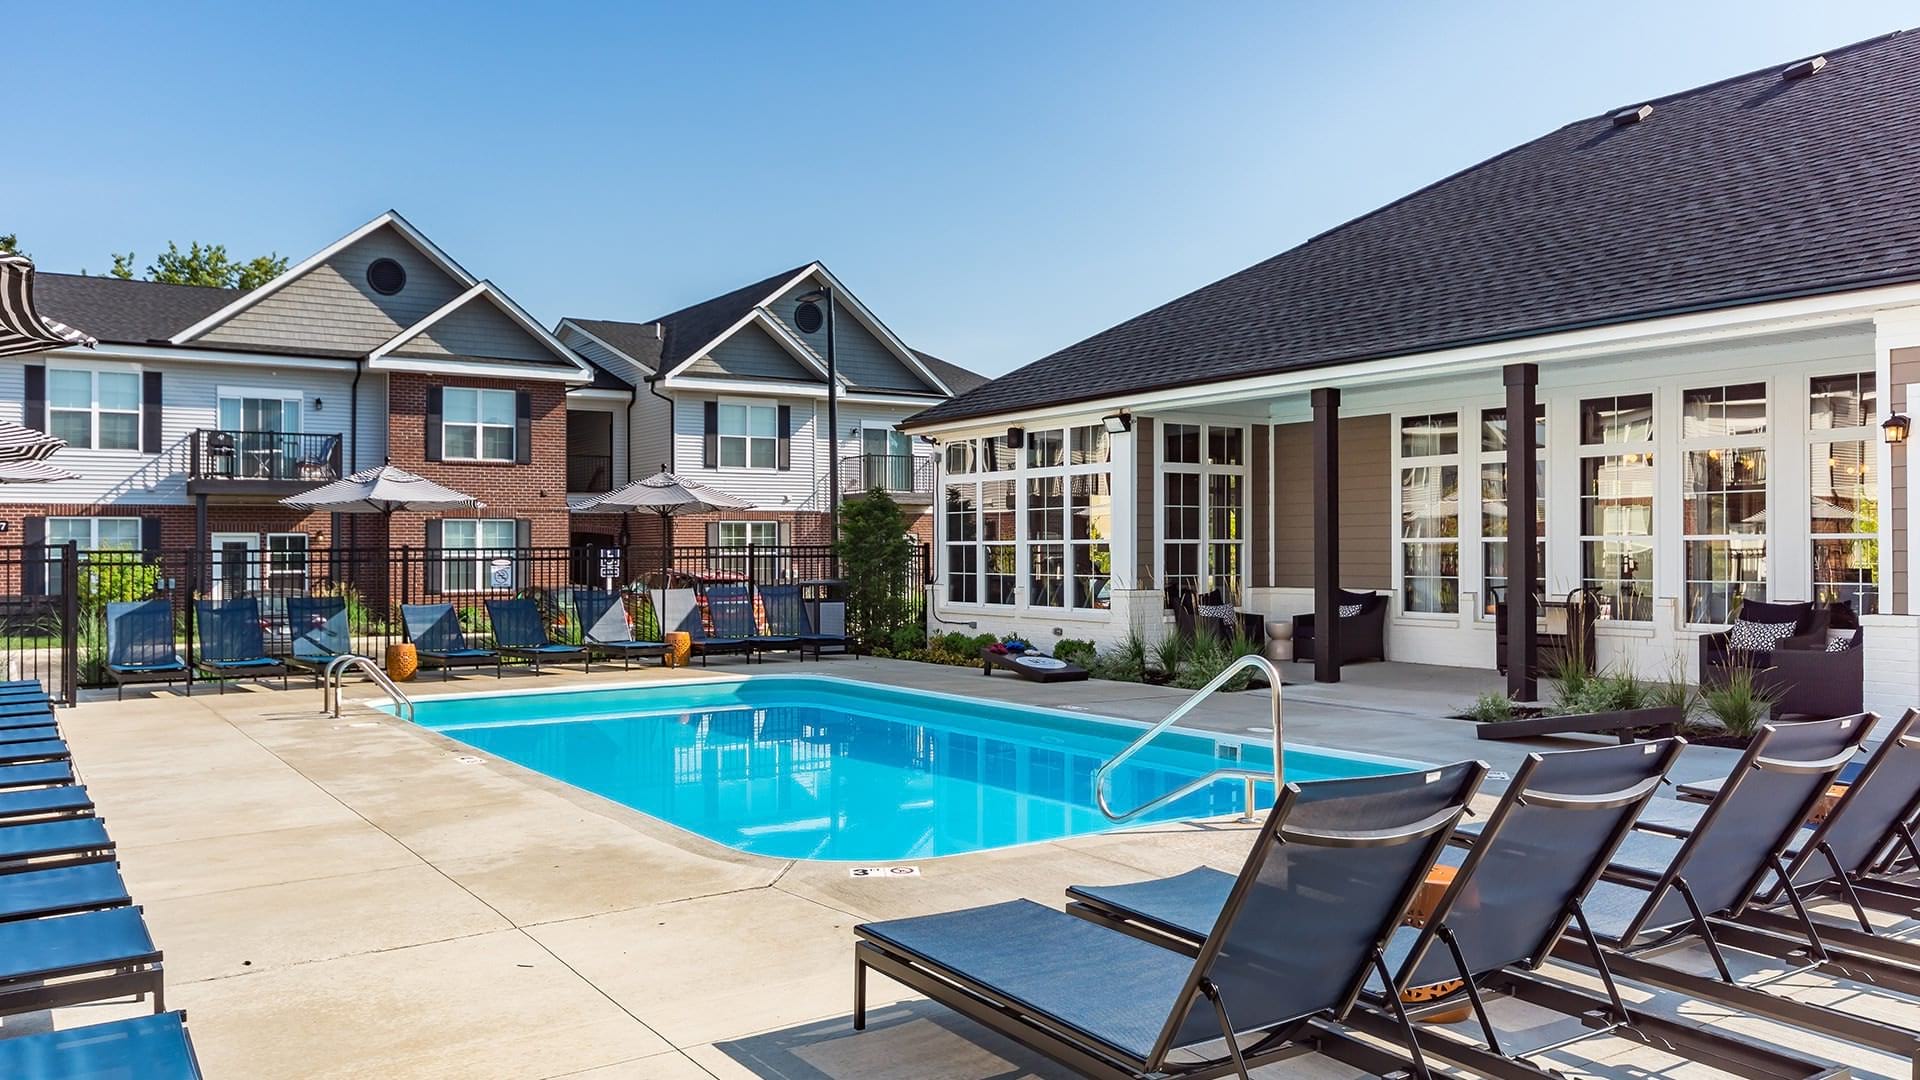 Sparkling Swimming Pool and Lounge Chairs at Our Peyton Park Apartments